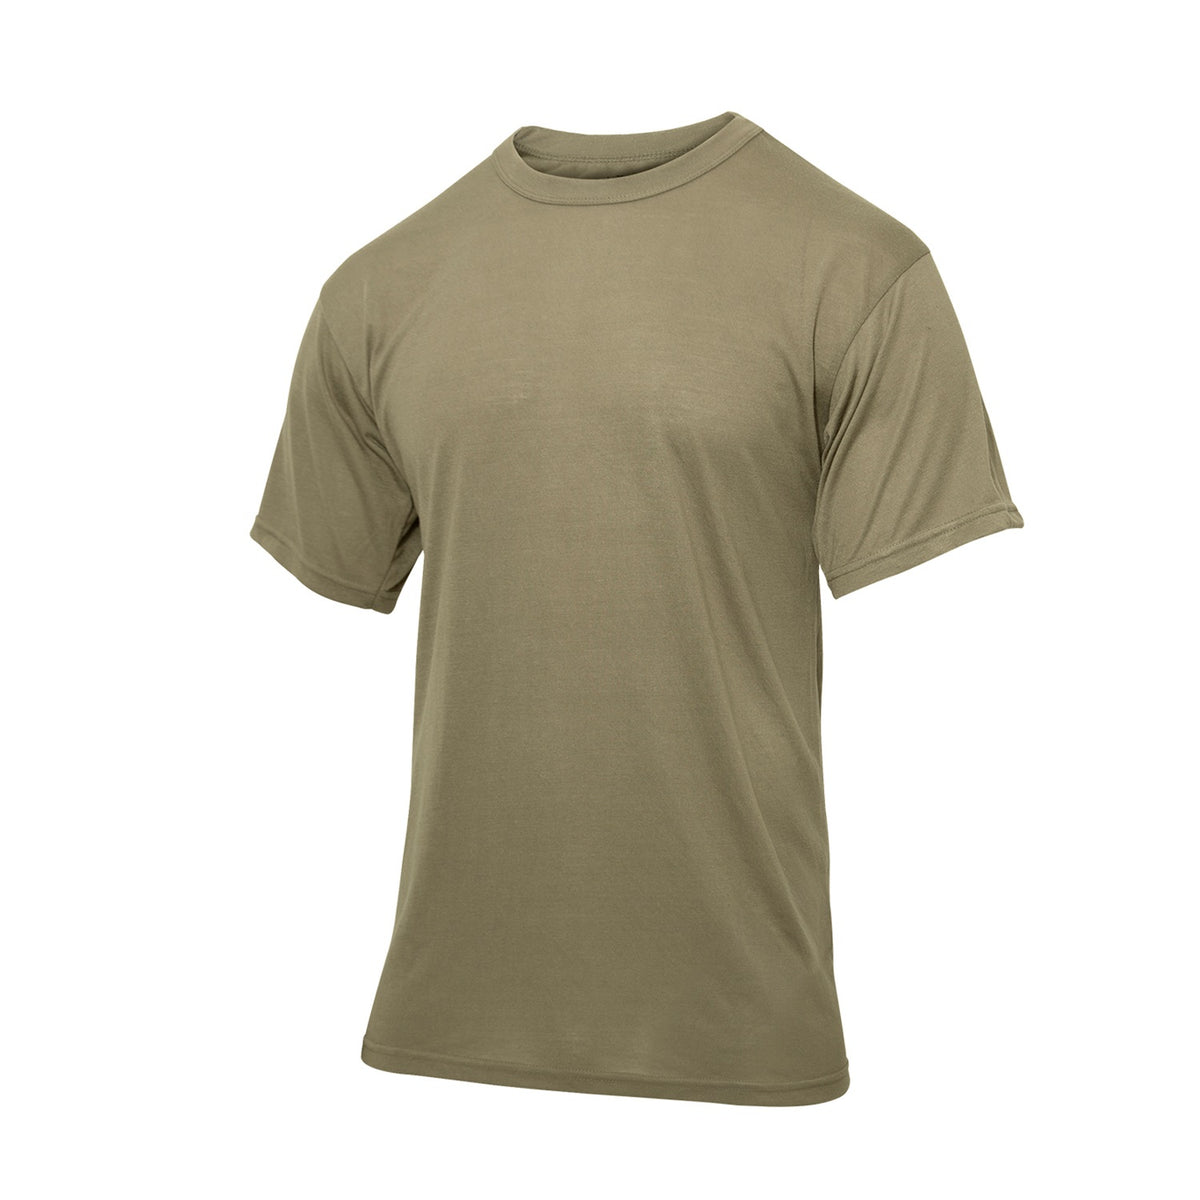 Rothco Moisture Wicking T-Shirts Coyote Brown